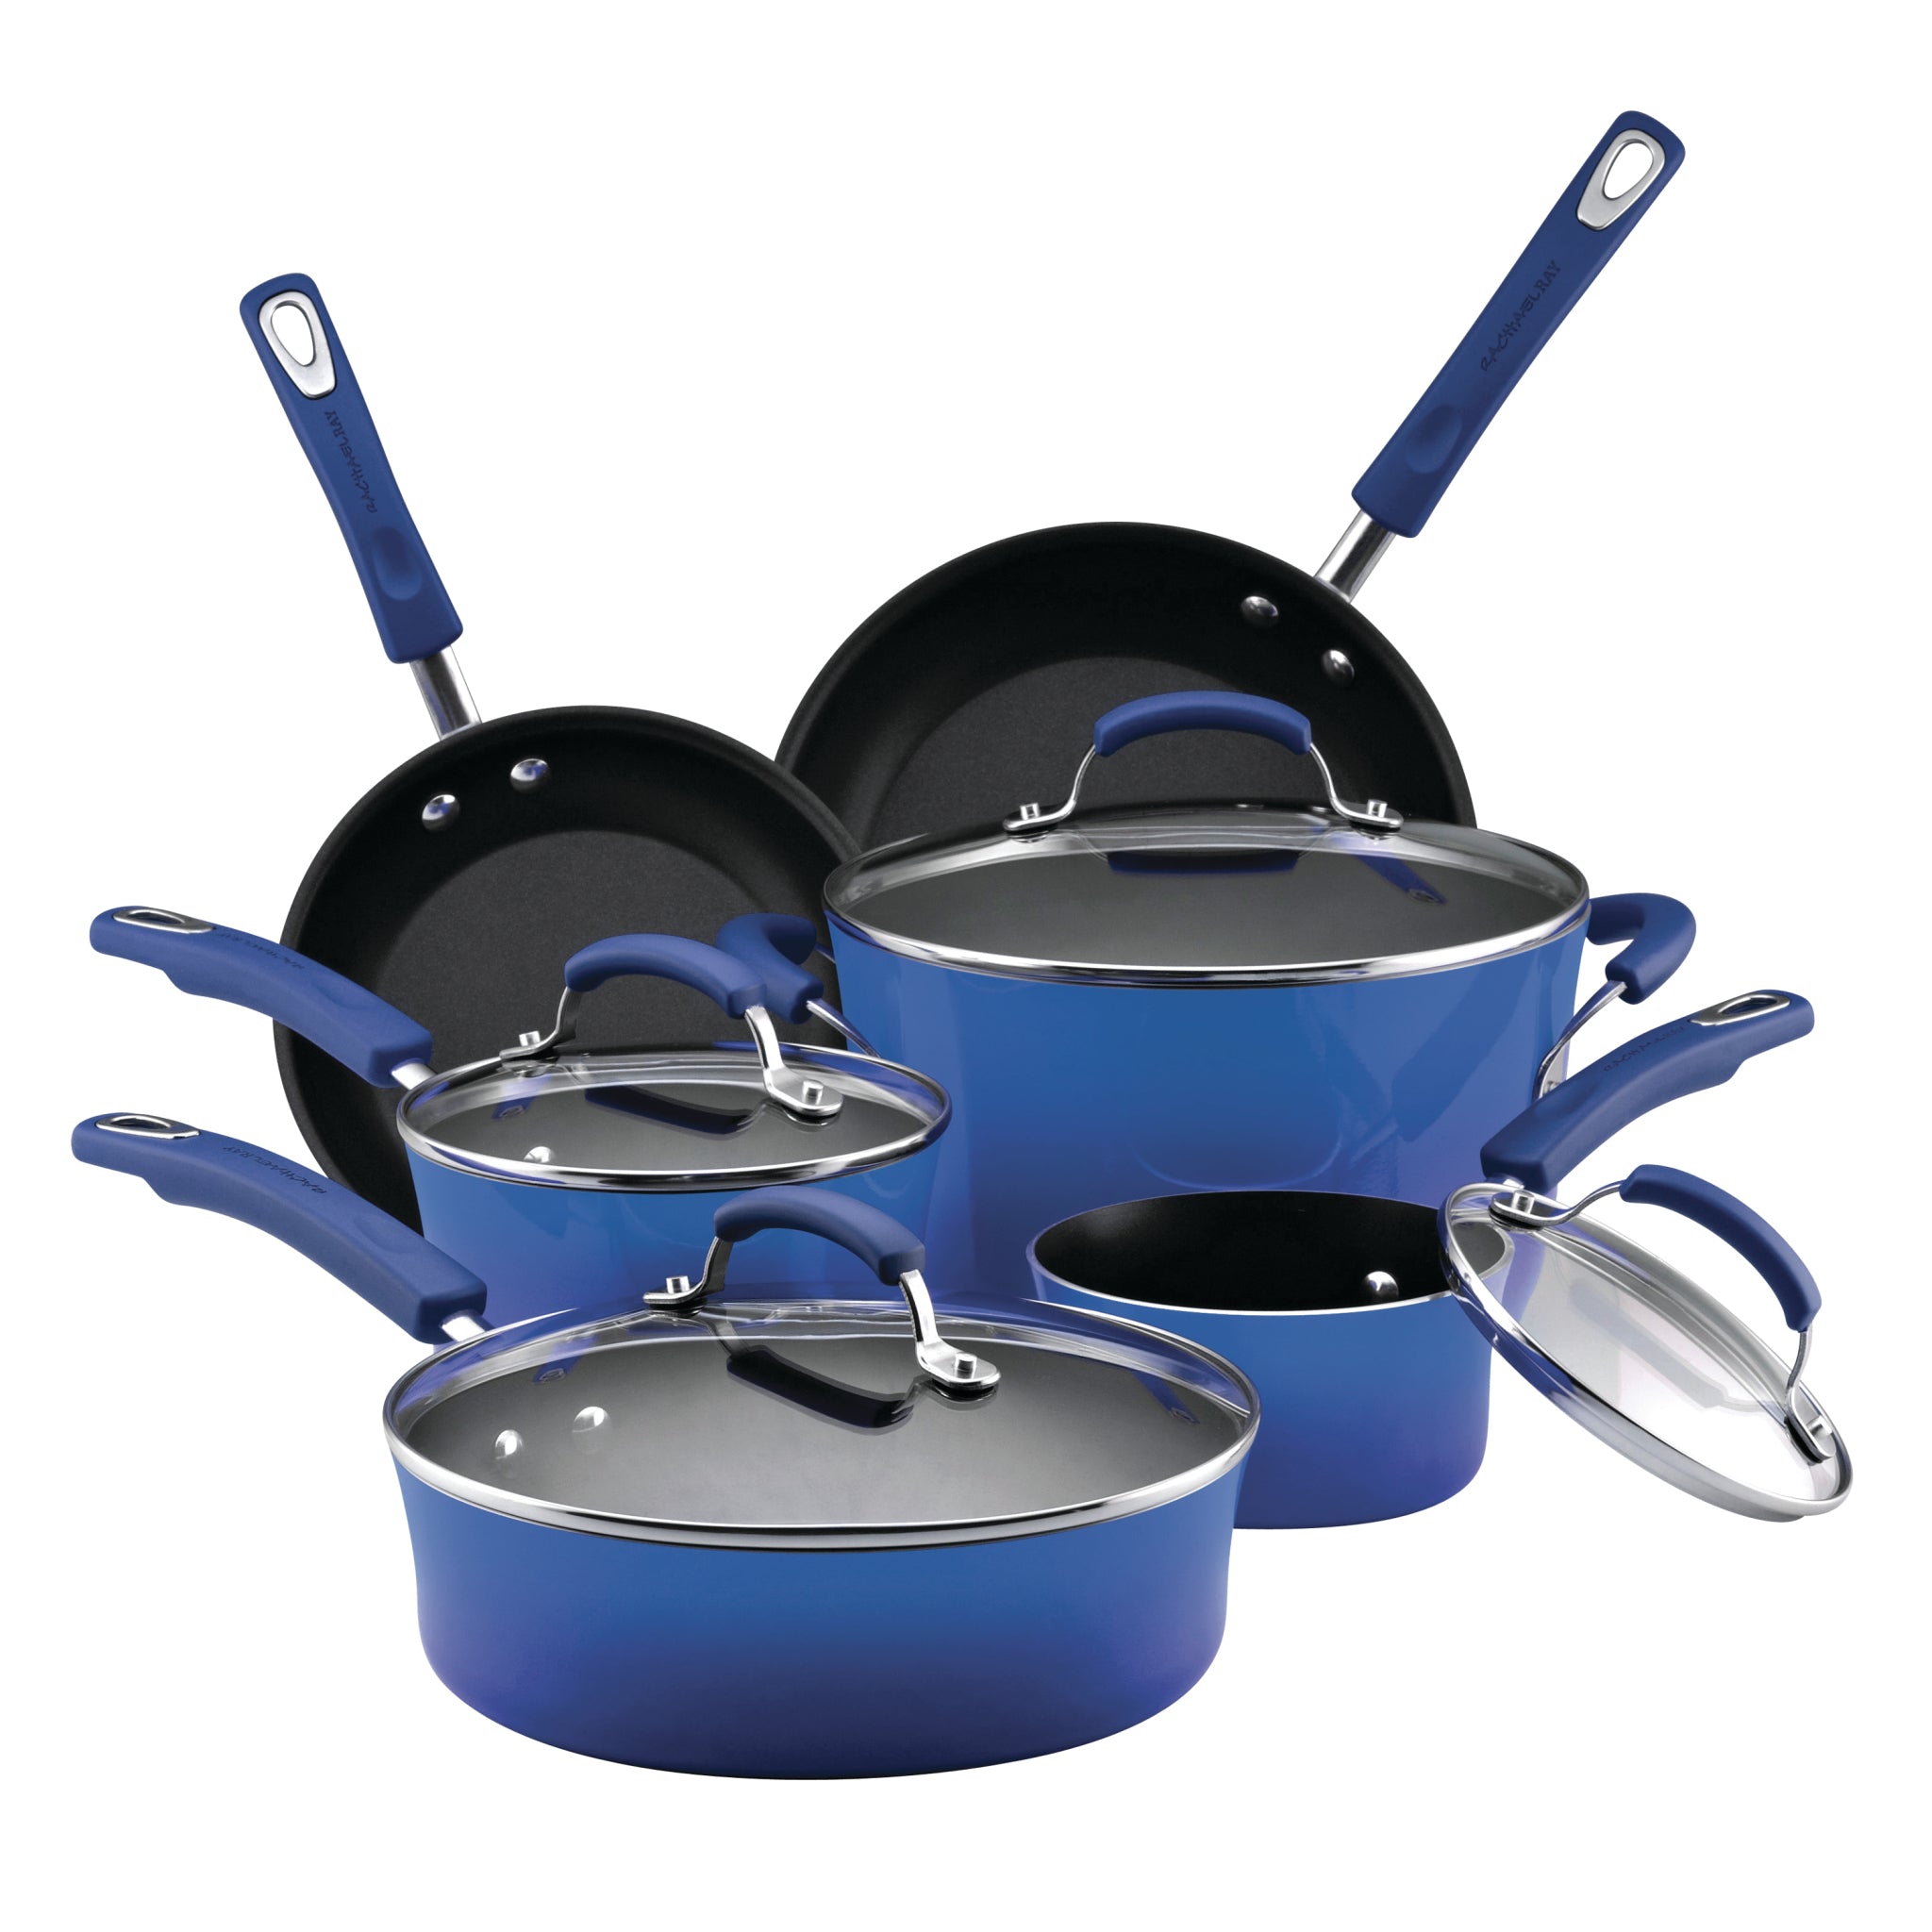 Rachael Ray cookware: Snag this 14-piece set for less than $100